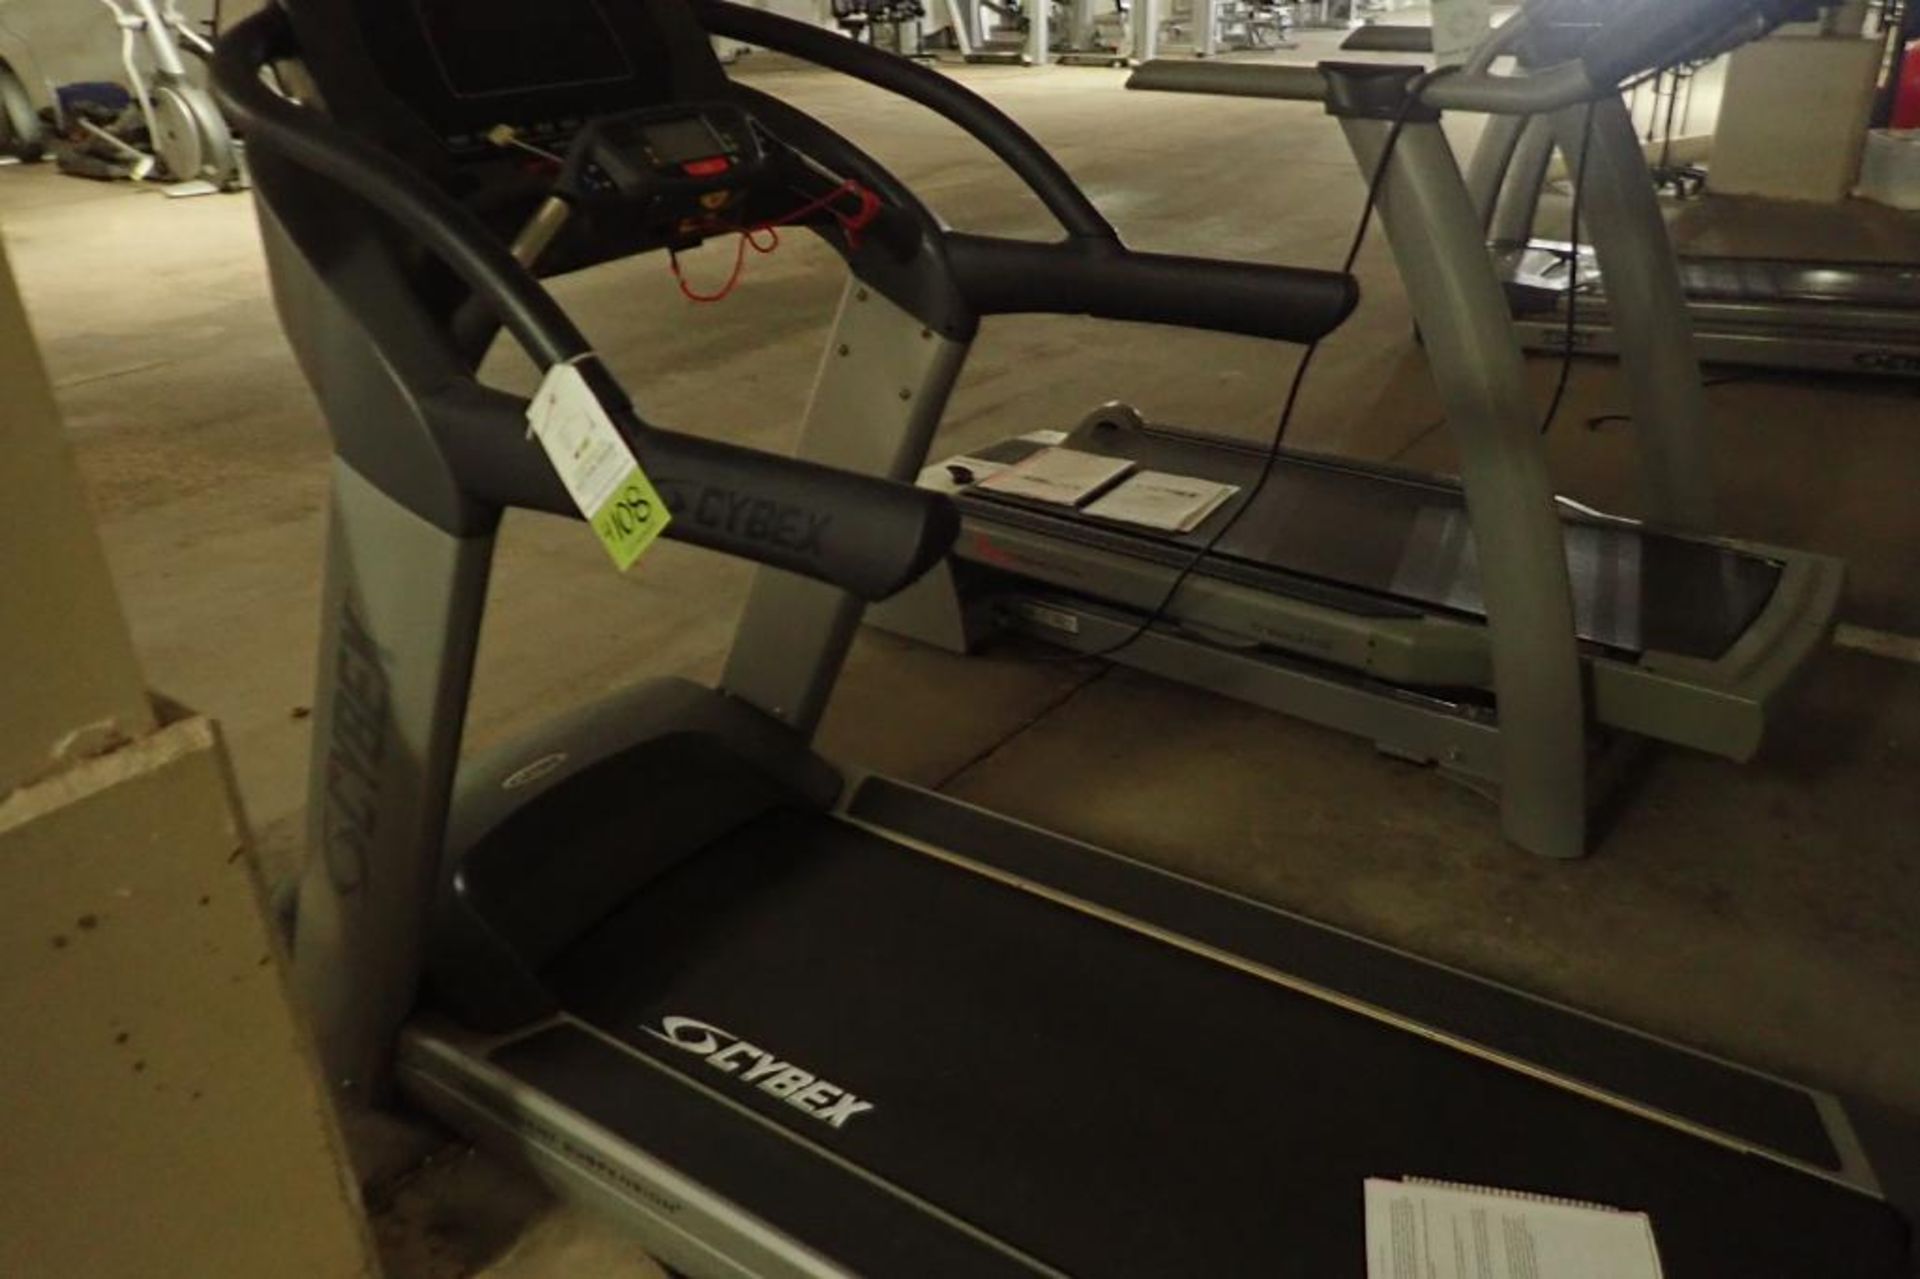 Manufacturer: Cybex - Treadmill - Model Number: 770T - Image 2 of 4